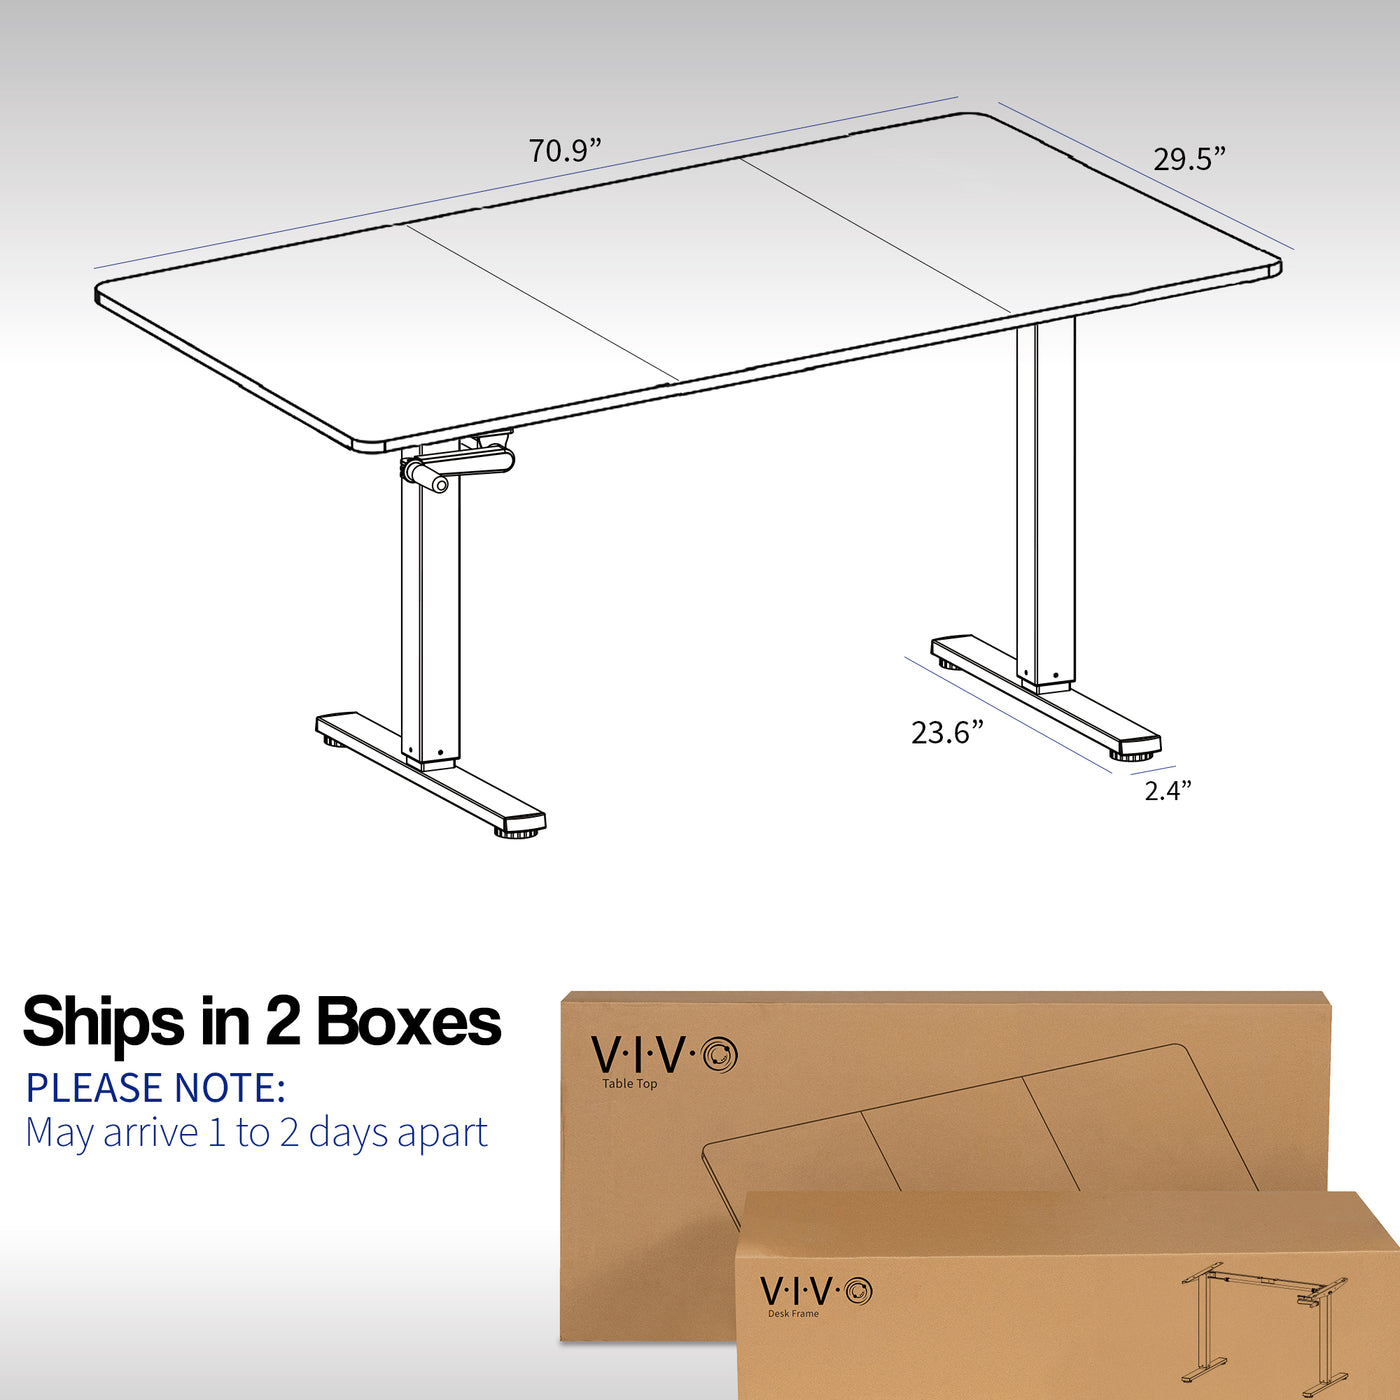 Please note that this desk ships in two separate boxes and has the potential to arrive on separate days.